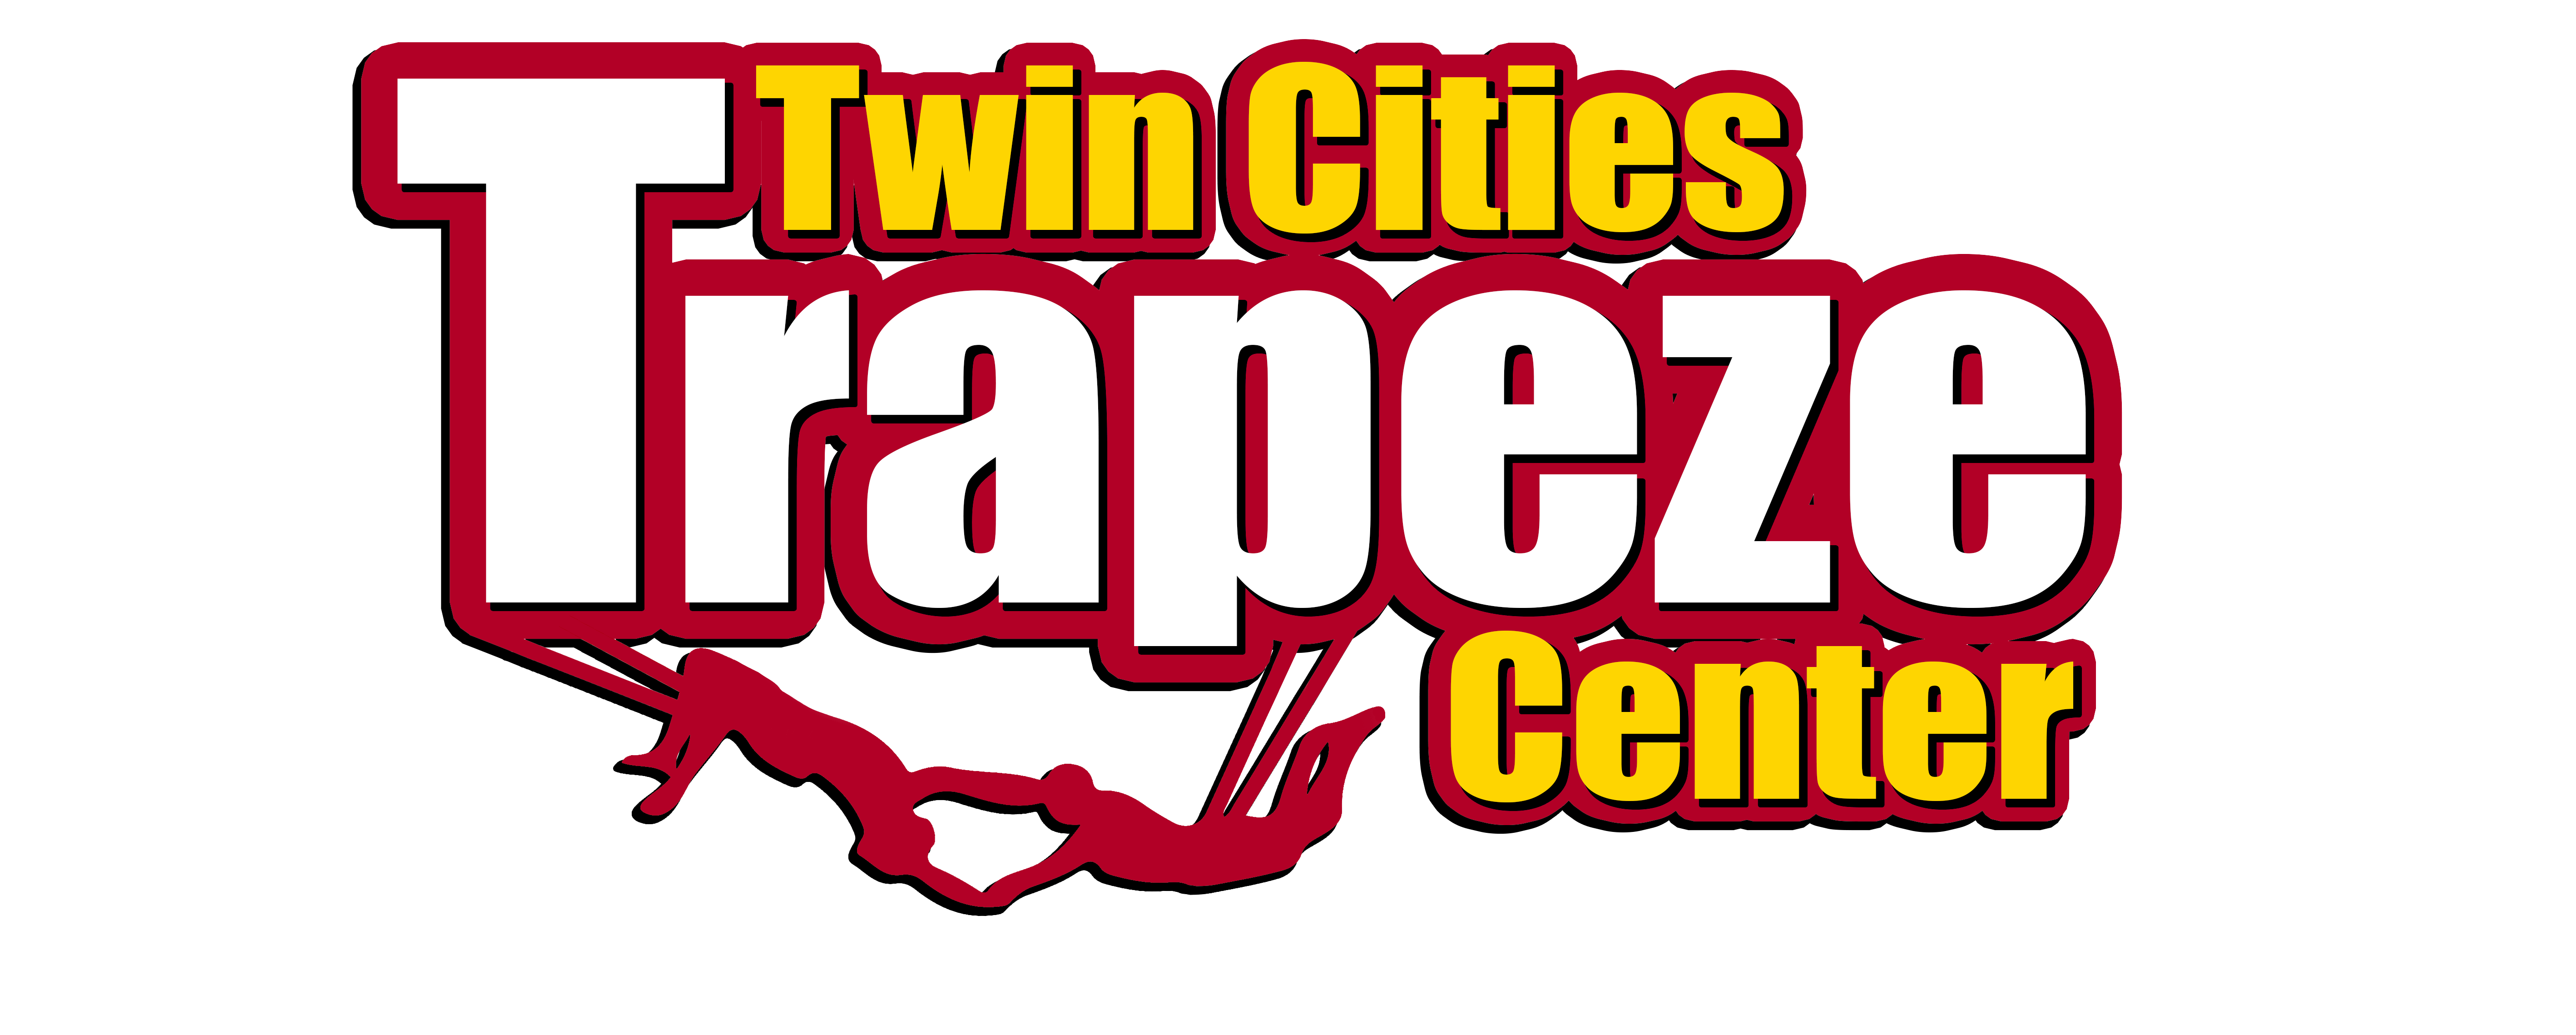 Event Promo Photo For Twin Cities Trapeze Center Student Showcase